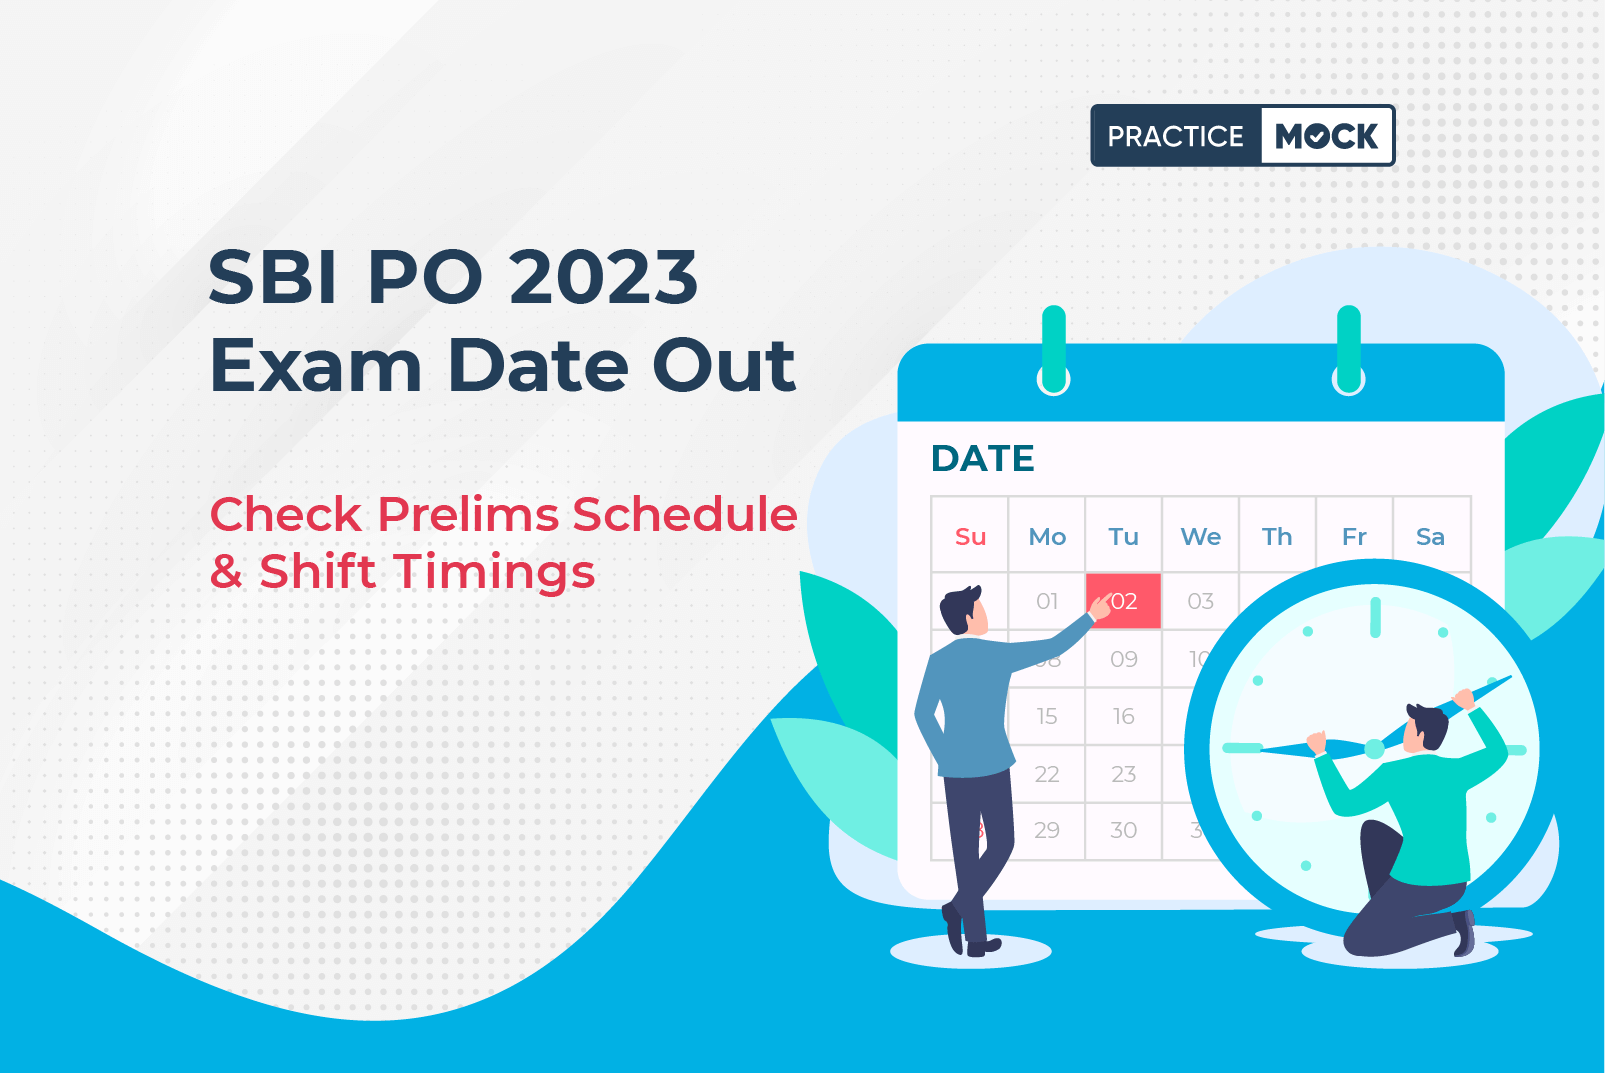 Get the latest updates on the SBI PO exam date 2023, prelims schedule and shift timings, mains exam date and admit card release.